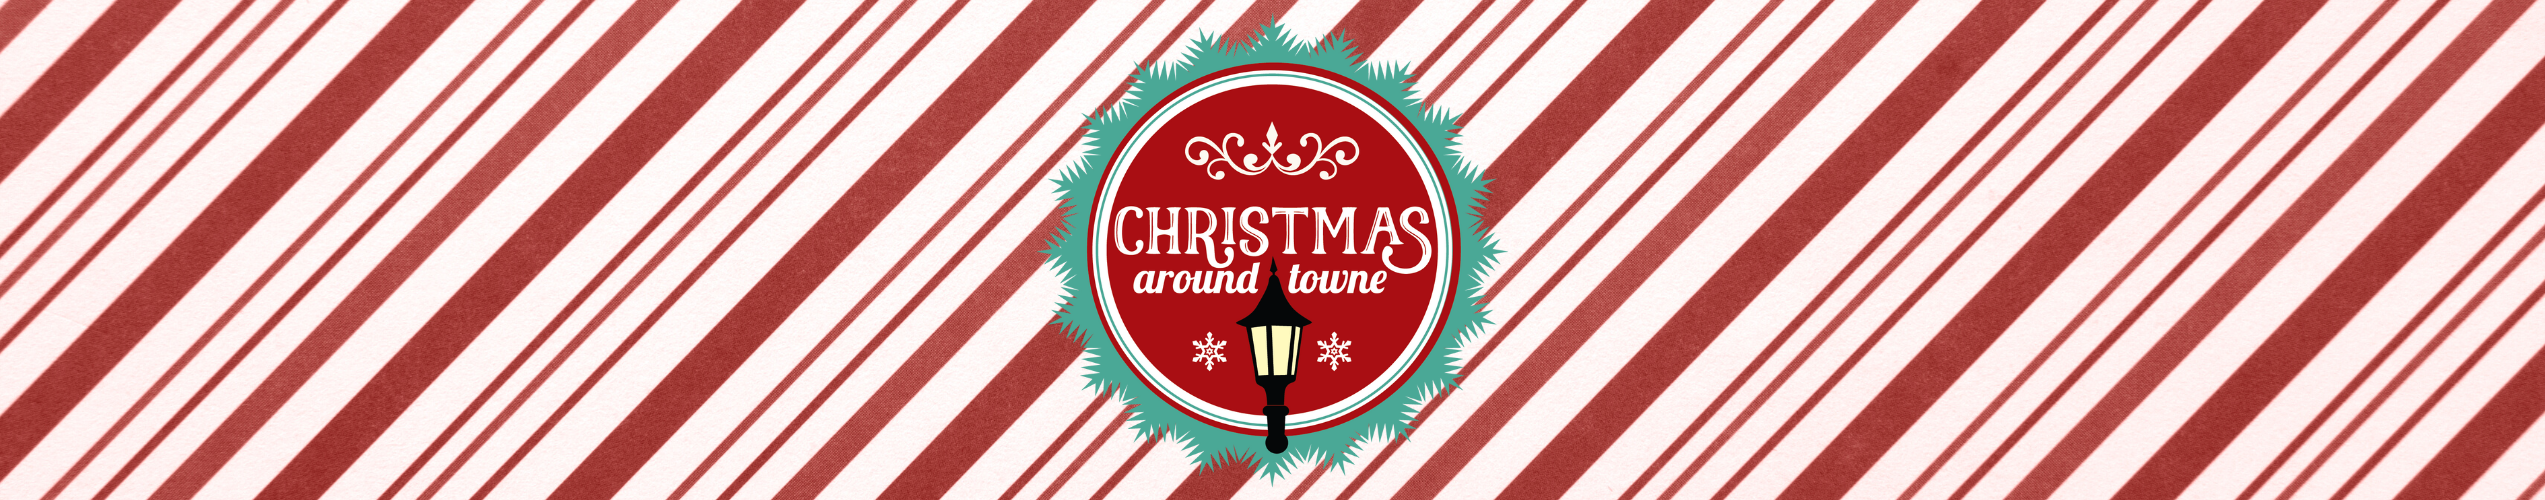 Christmas Around Towne Website and Header (1)